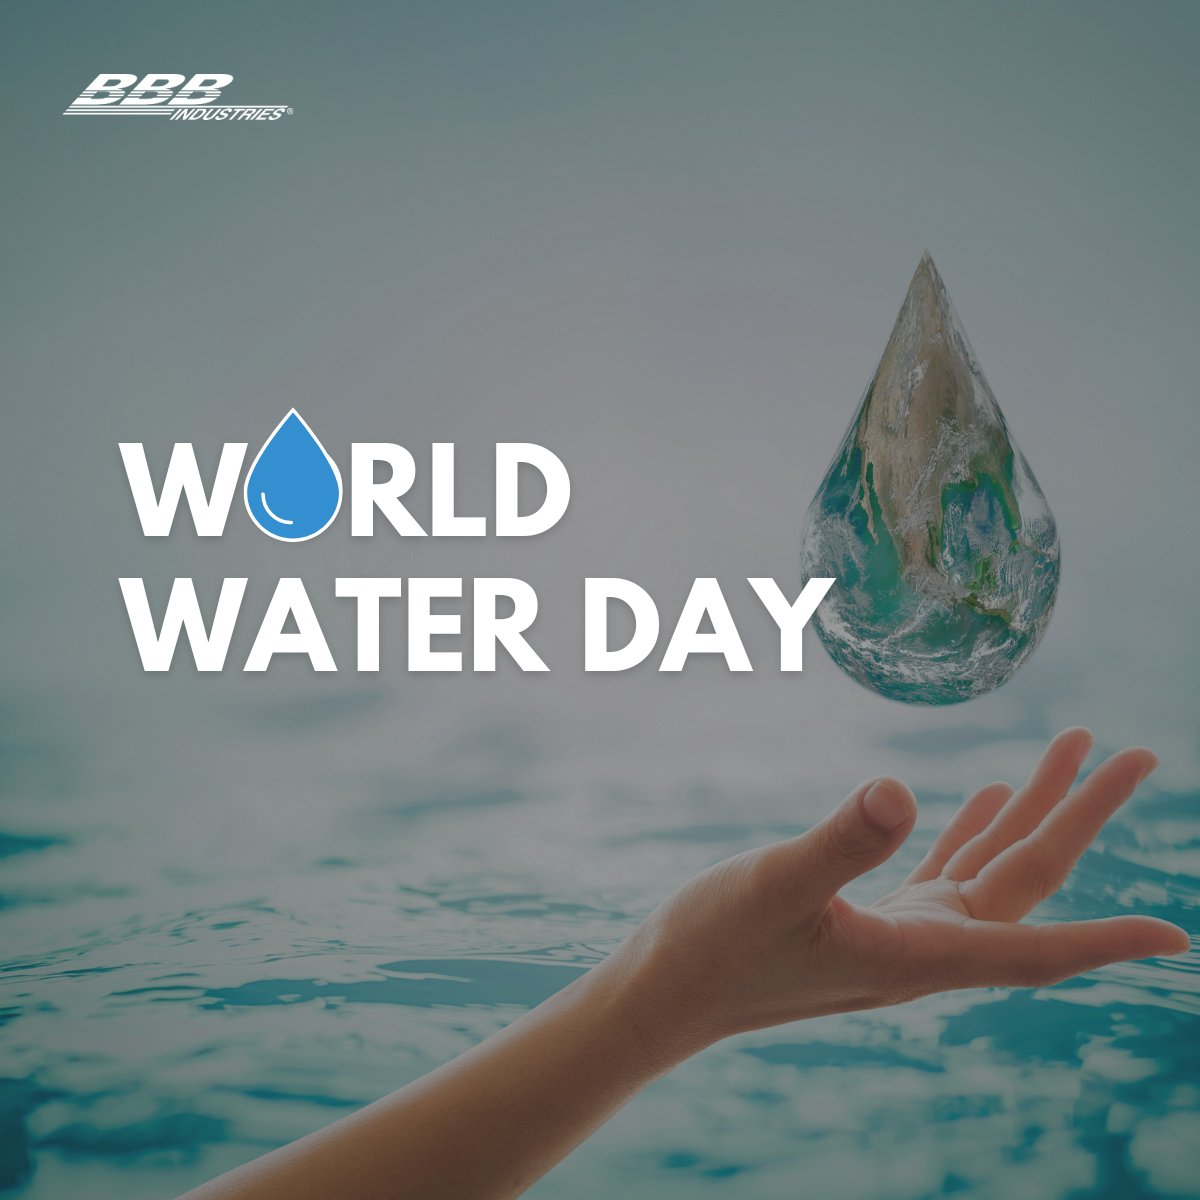 March 22 is #WorldWaterDay. Today, we celebrate the importance of fresh water for all and the value of it. It's a day to advocate for access to safe water for everyone. Our case study, 'Be Wise with Water,' exemplifies this commitment. Read more: bit.ly/49sN7pD.